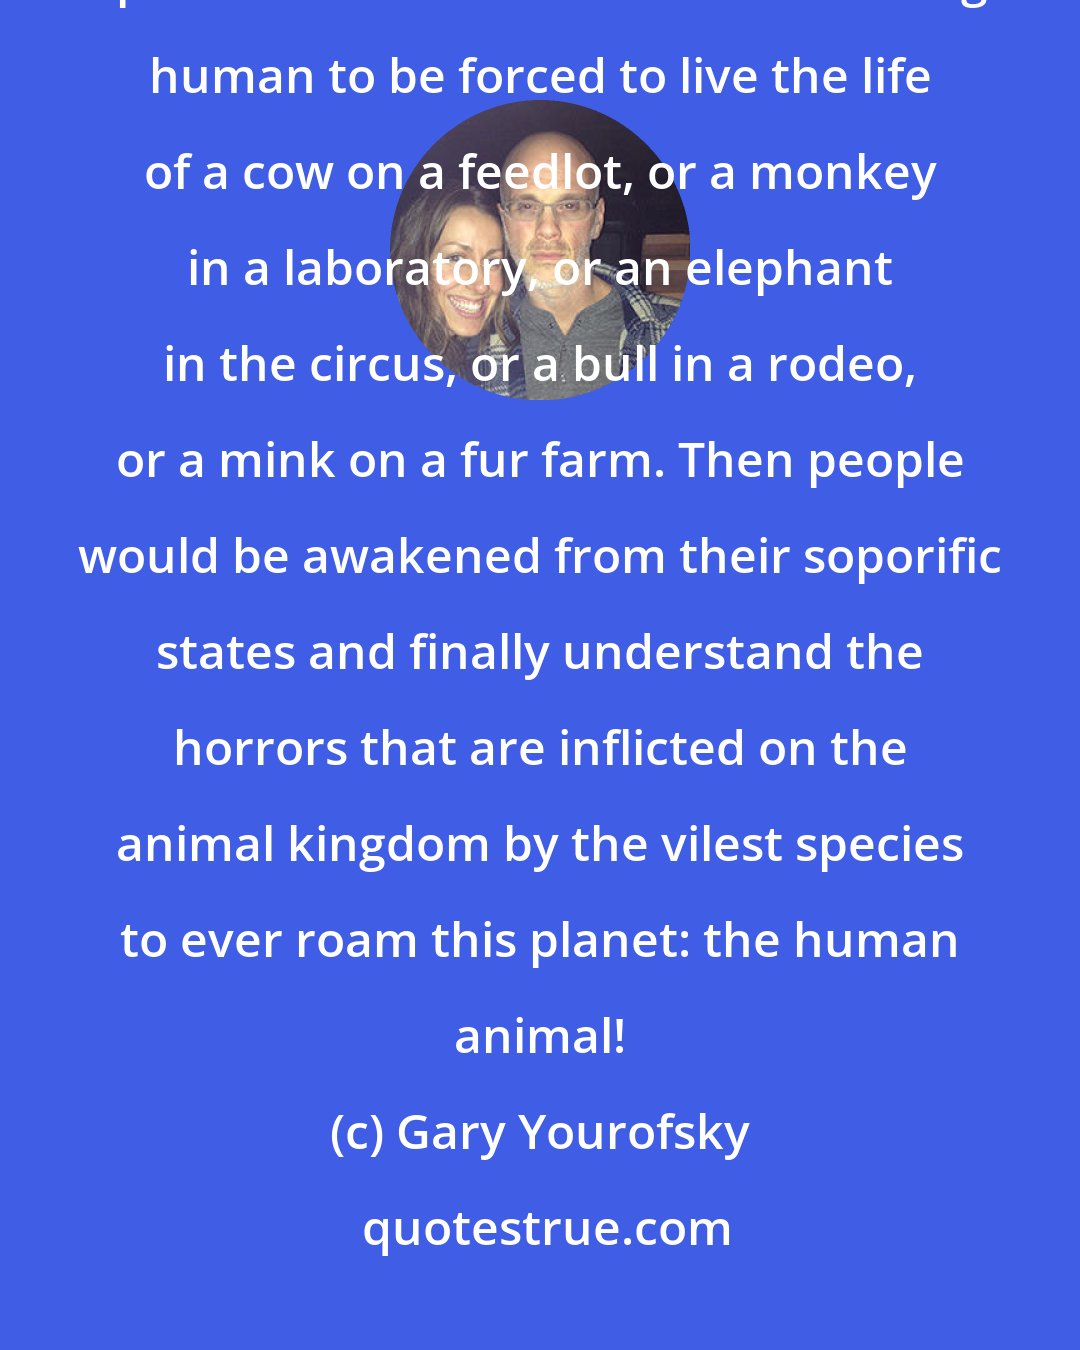 Gary Yourofsky: Sometimes I think that the only effective and productive method of destroying speciesism would be for each uncaring human to be forced to live the life of a cow on a feedlot, or a monkey in a laboratory, or an elephant in the circus, or a bull in a rodeo, or a mink on a fur farm. Then people would be awakened from their soporific states and finally understand the horrors that are inflicted on the animal kingdom by the vilest species to ever roam this planet: the human animal!